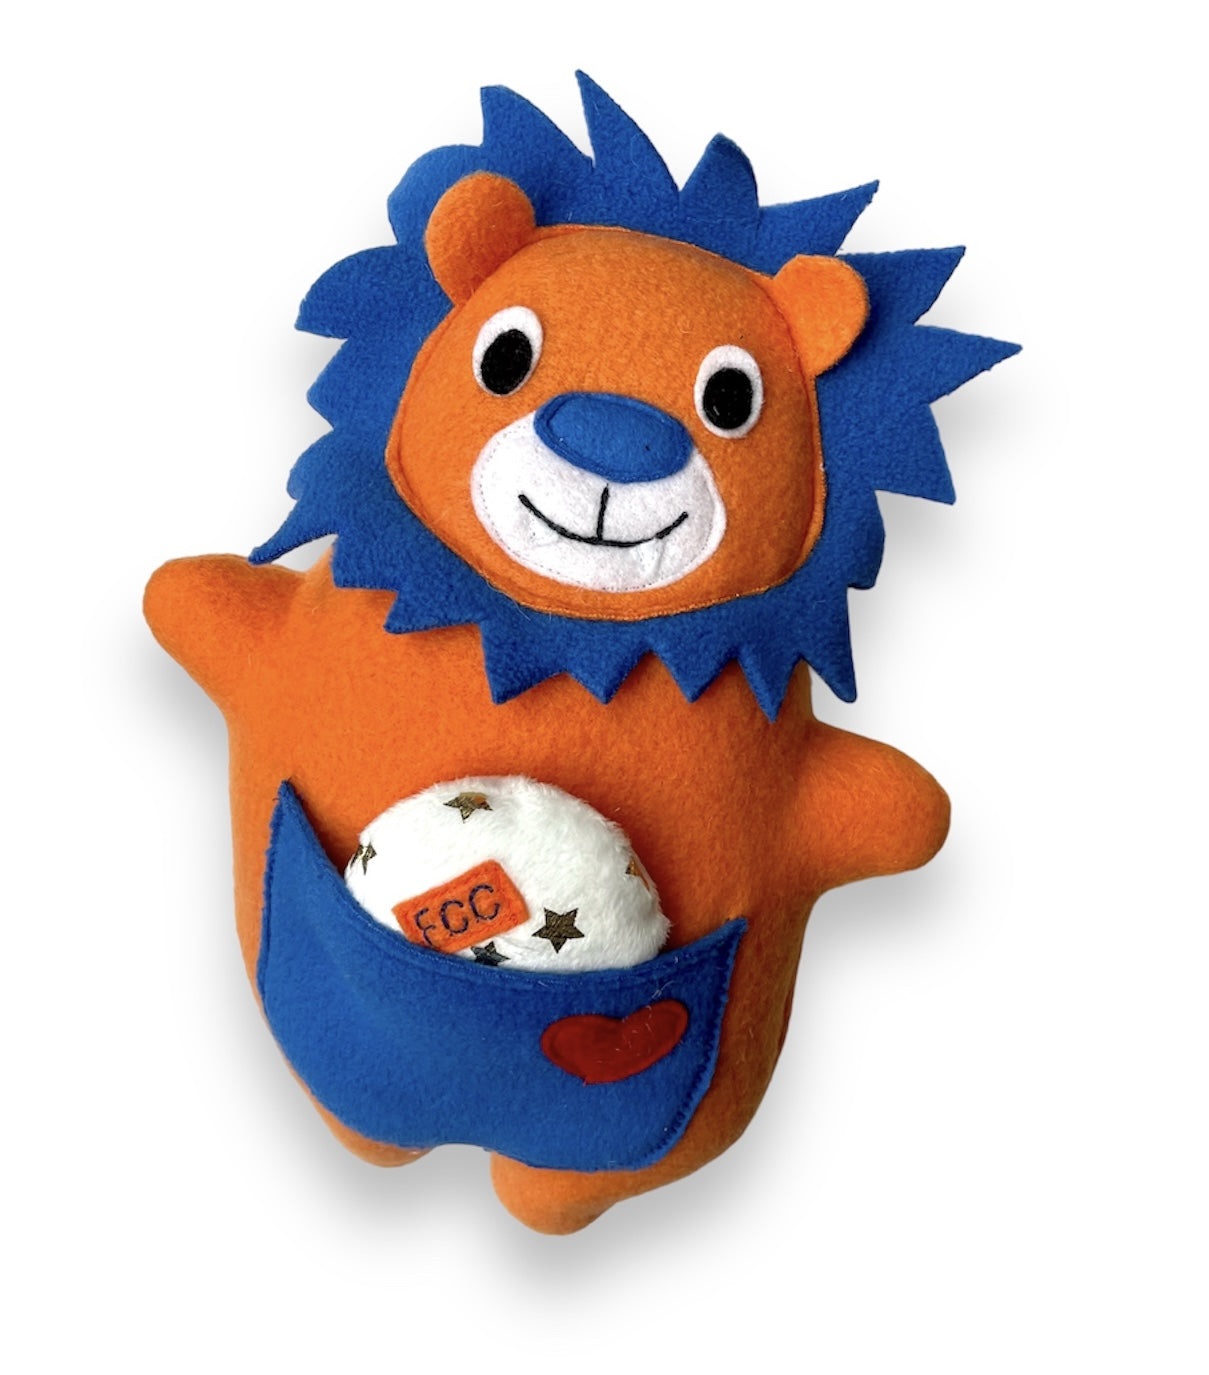 Orange and Blue Lion with a small ball in pocket all handmade